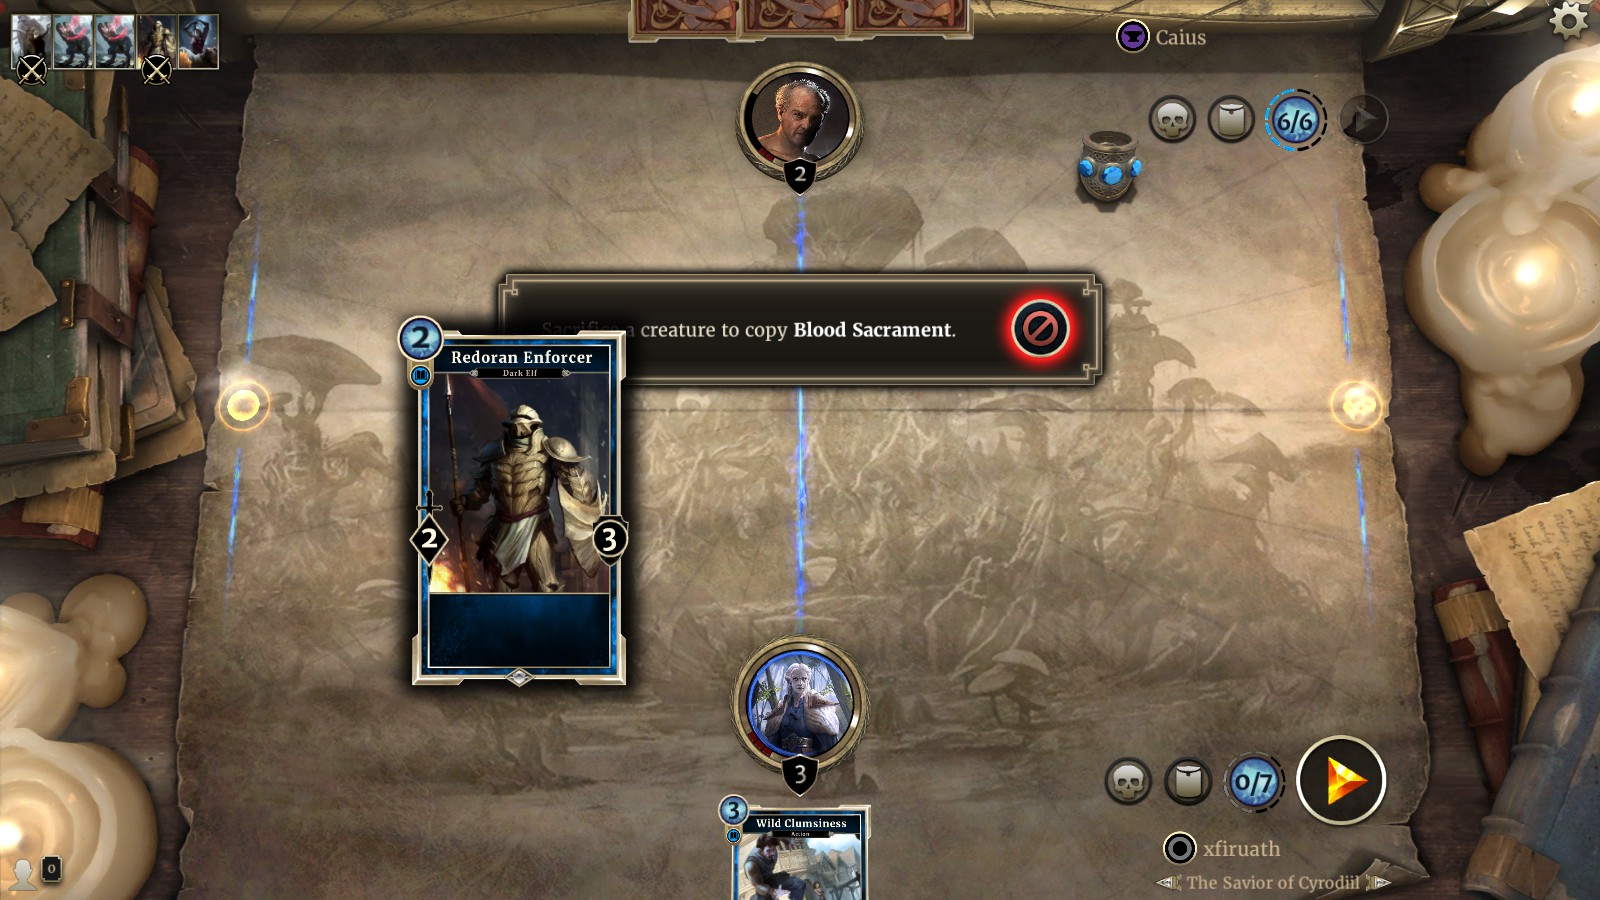 cards on the table during the telvanni Initiation Puzzle of Elder Scrolls Legends Houses of Morrowind expansion